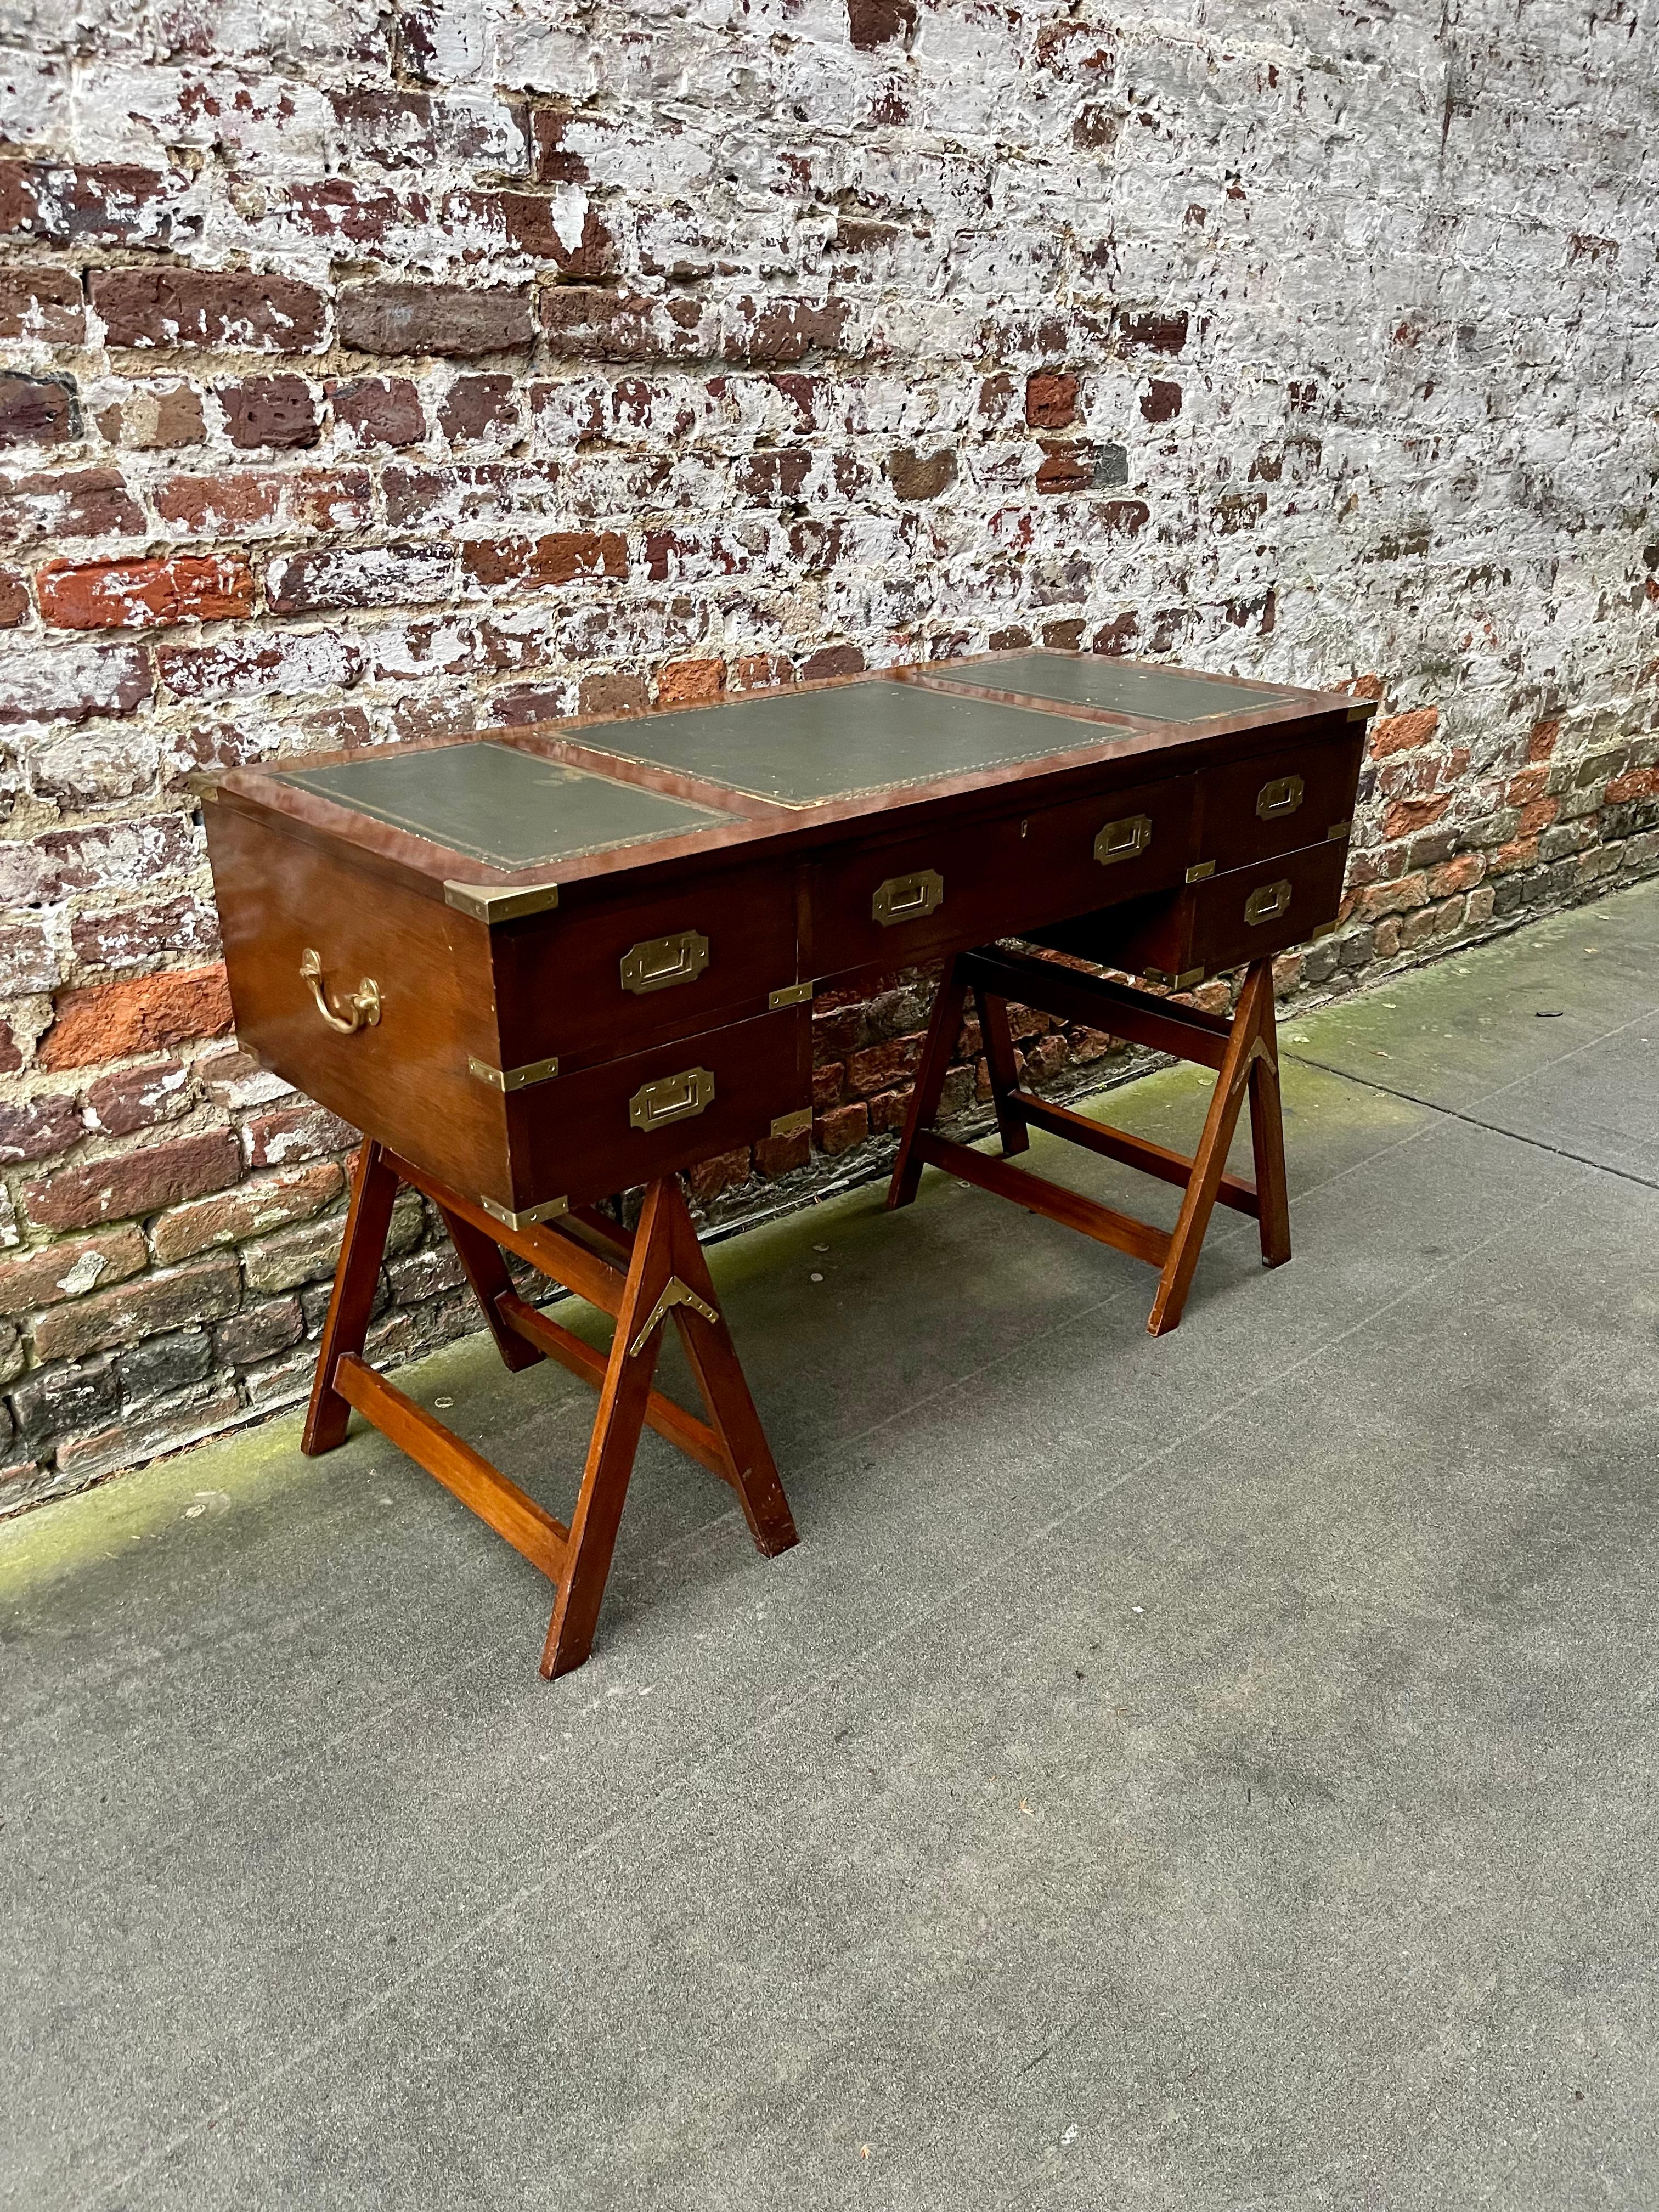 Mahogany campaign style desk on stand with leather writing surface.